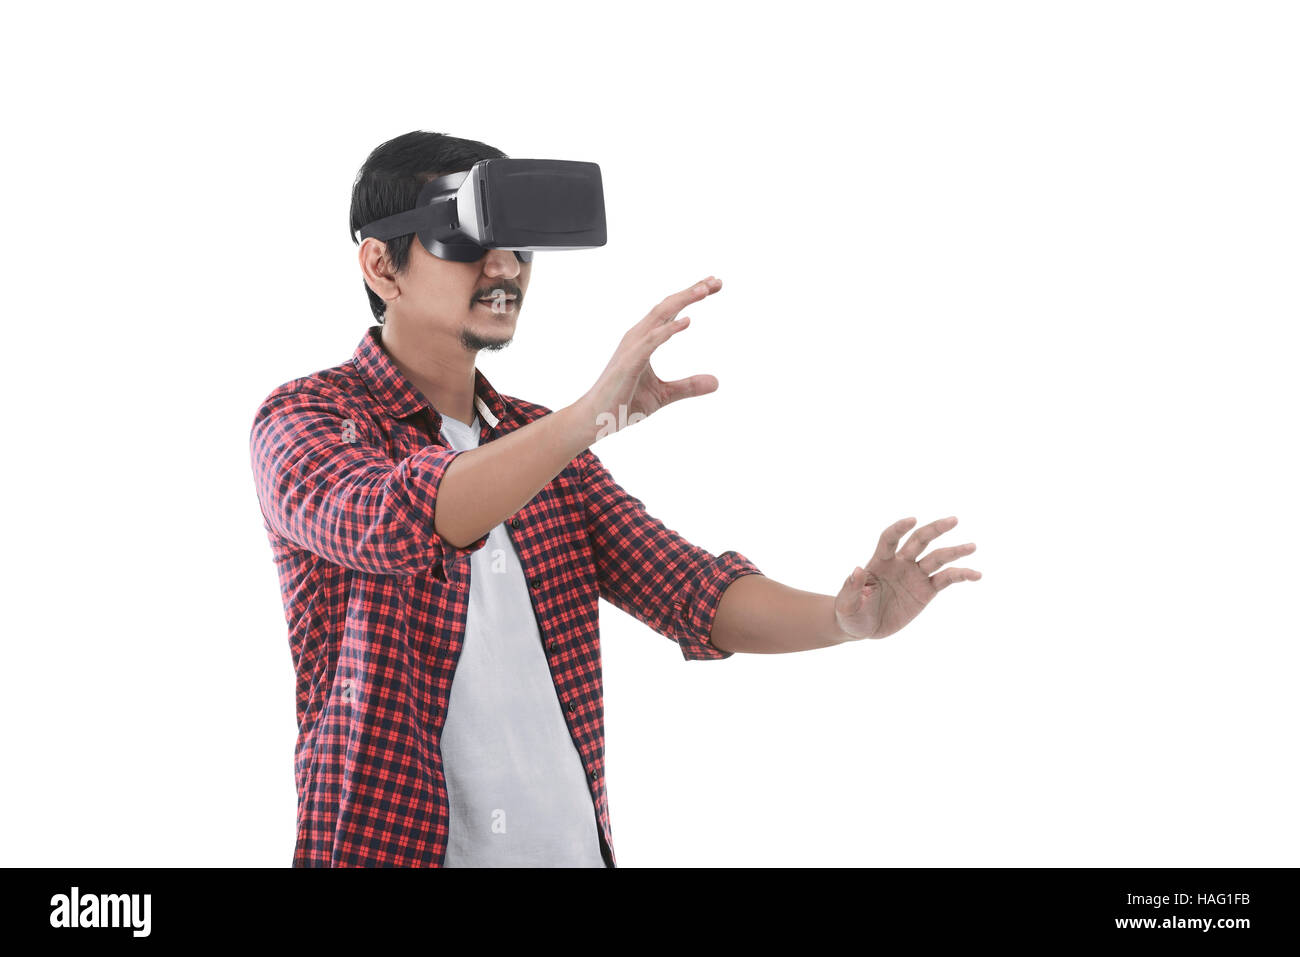 Young asian man experiencing virtual reality through a VR headset isolated on white background Stock Photo